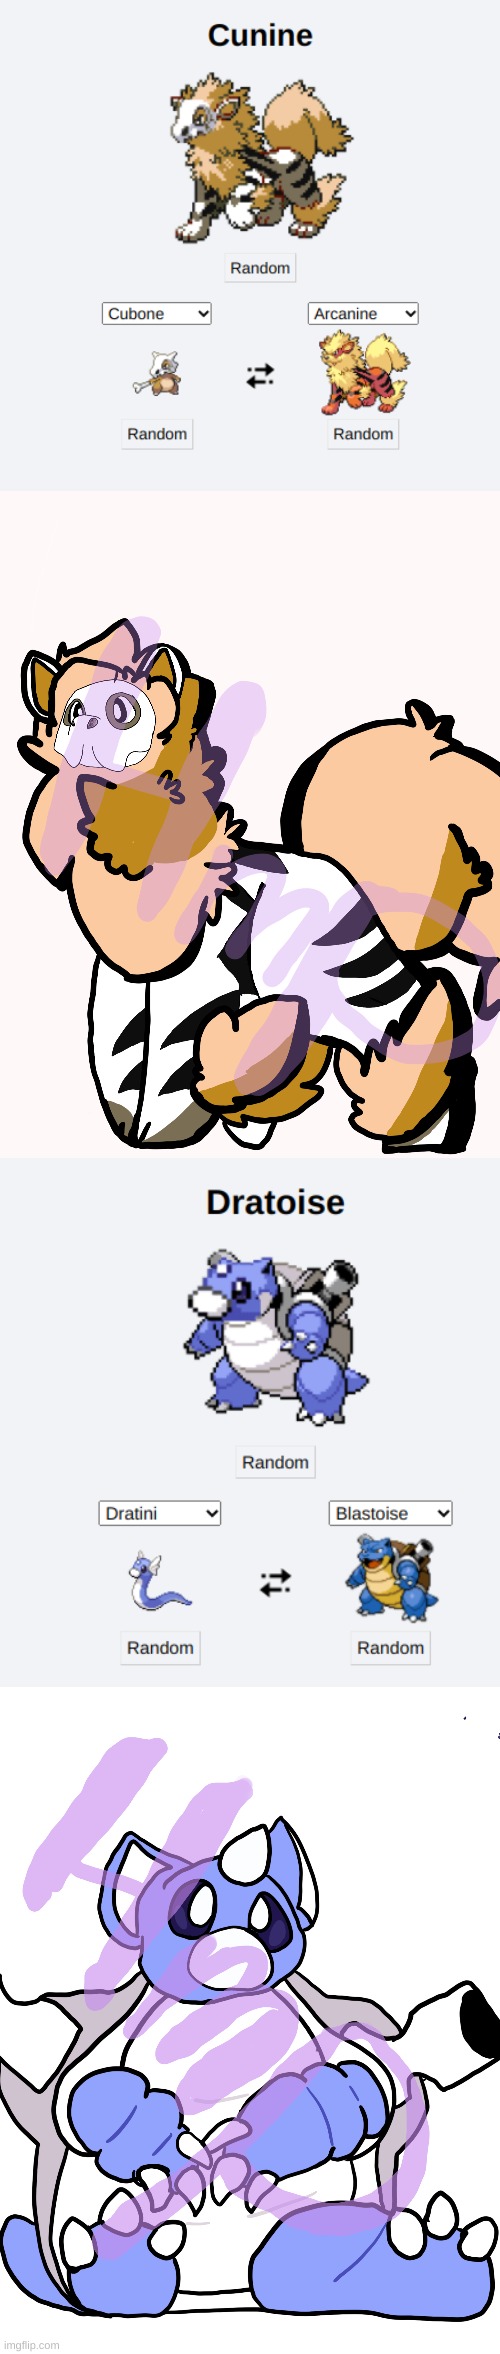 I tried doing drawings of pokemon fusions, i like these two, so ill do two more tomorrow if i remember | image tagged in pokemon | made w/ Imgflip meme maker